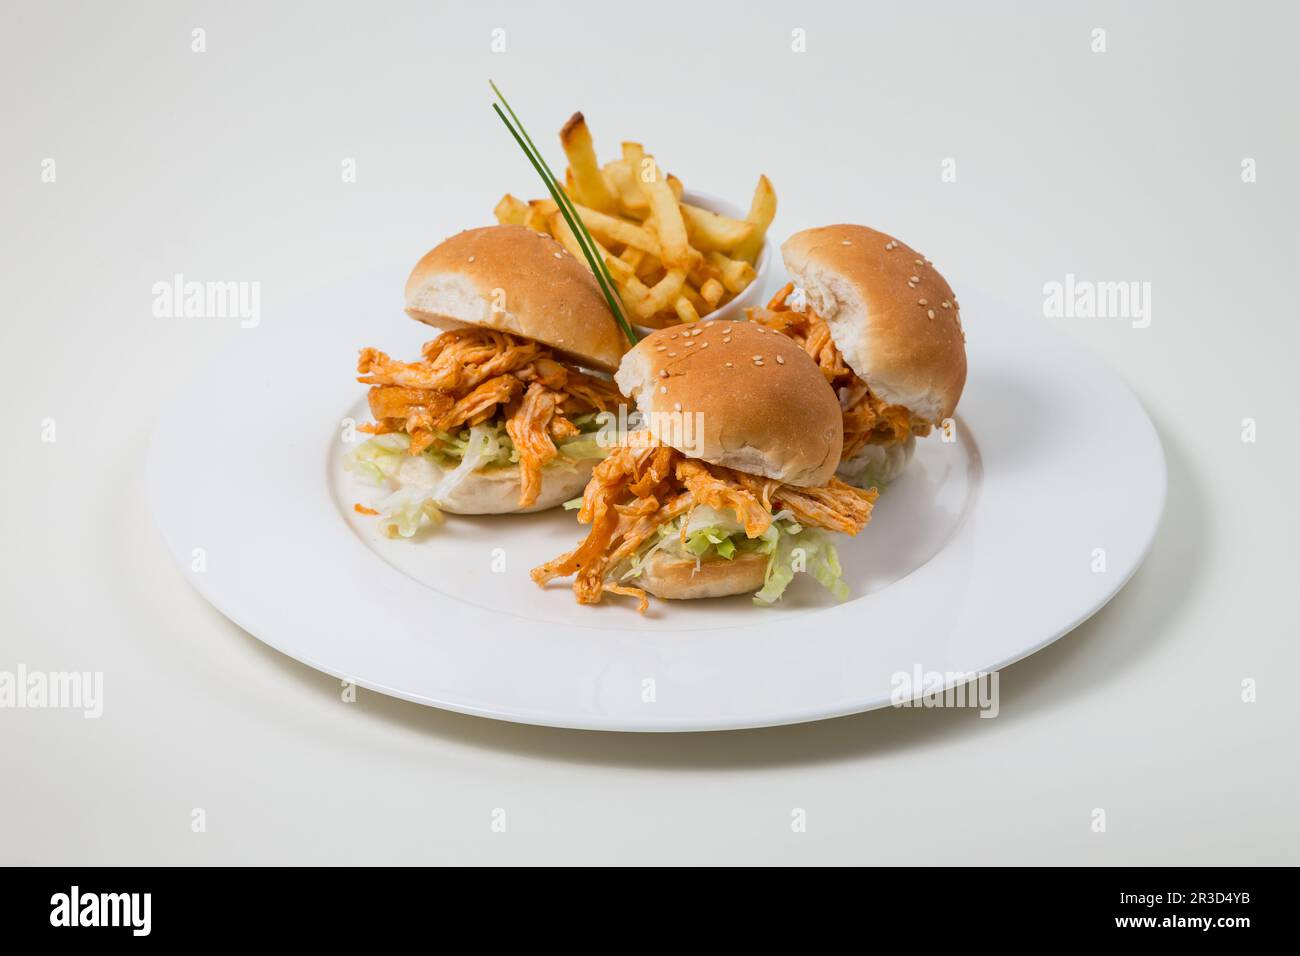 Chicken Burger and Fries on a white plate on a white background isolated Stock Photo